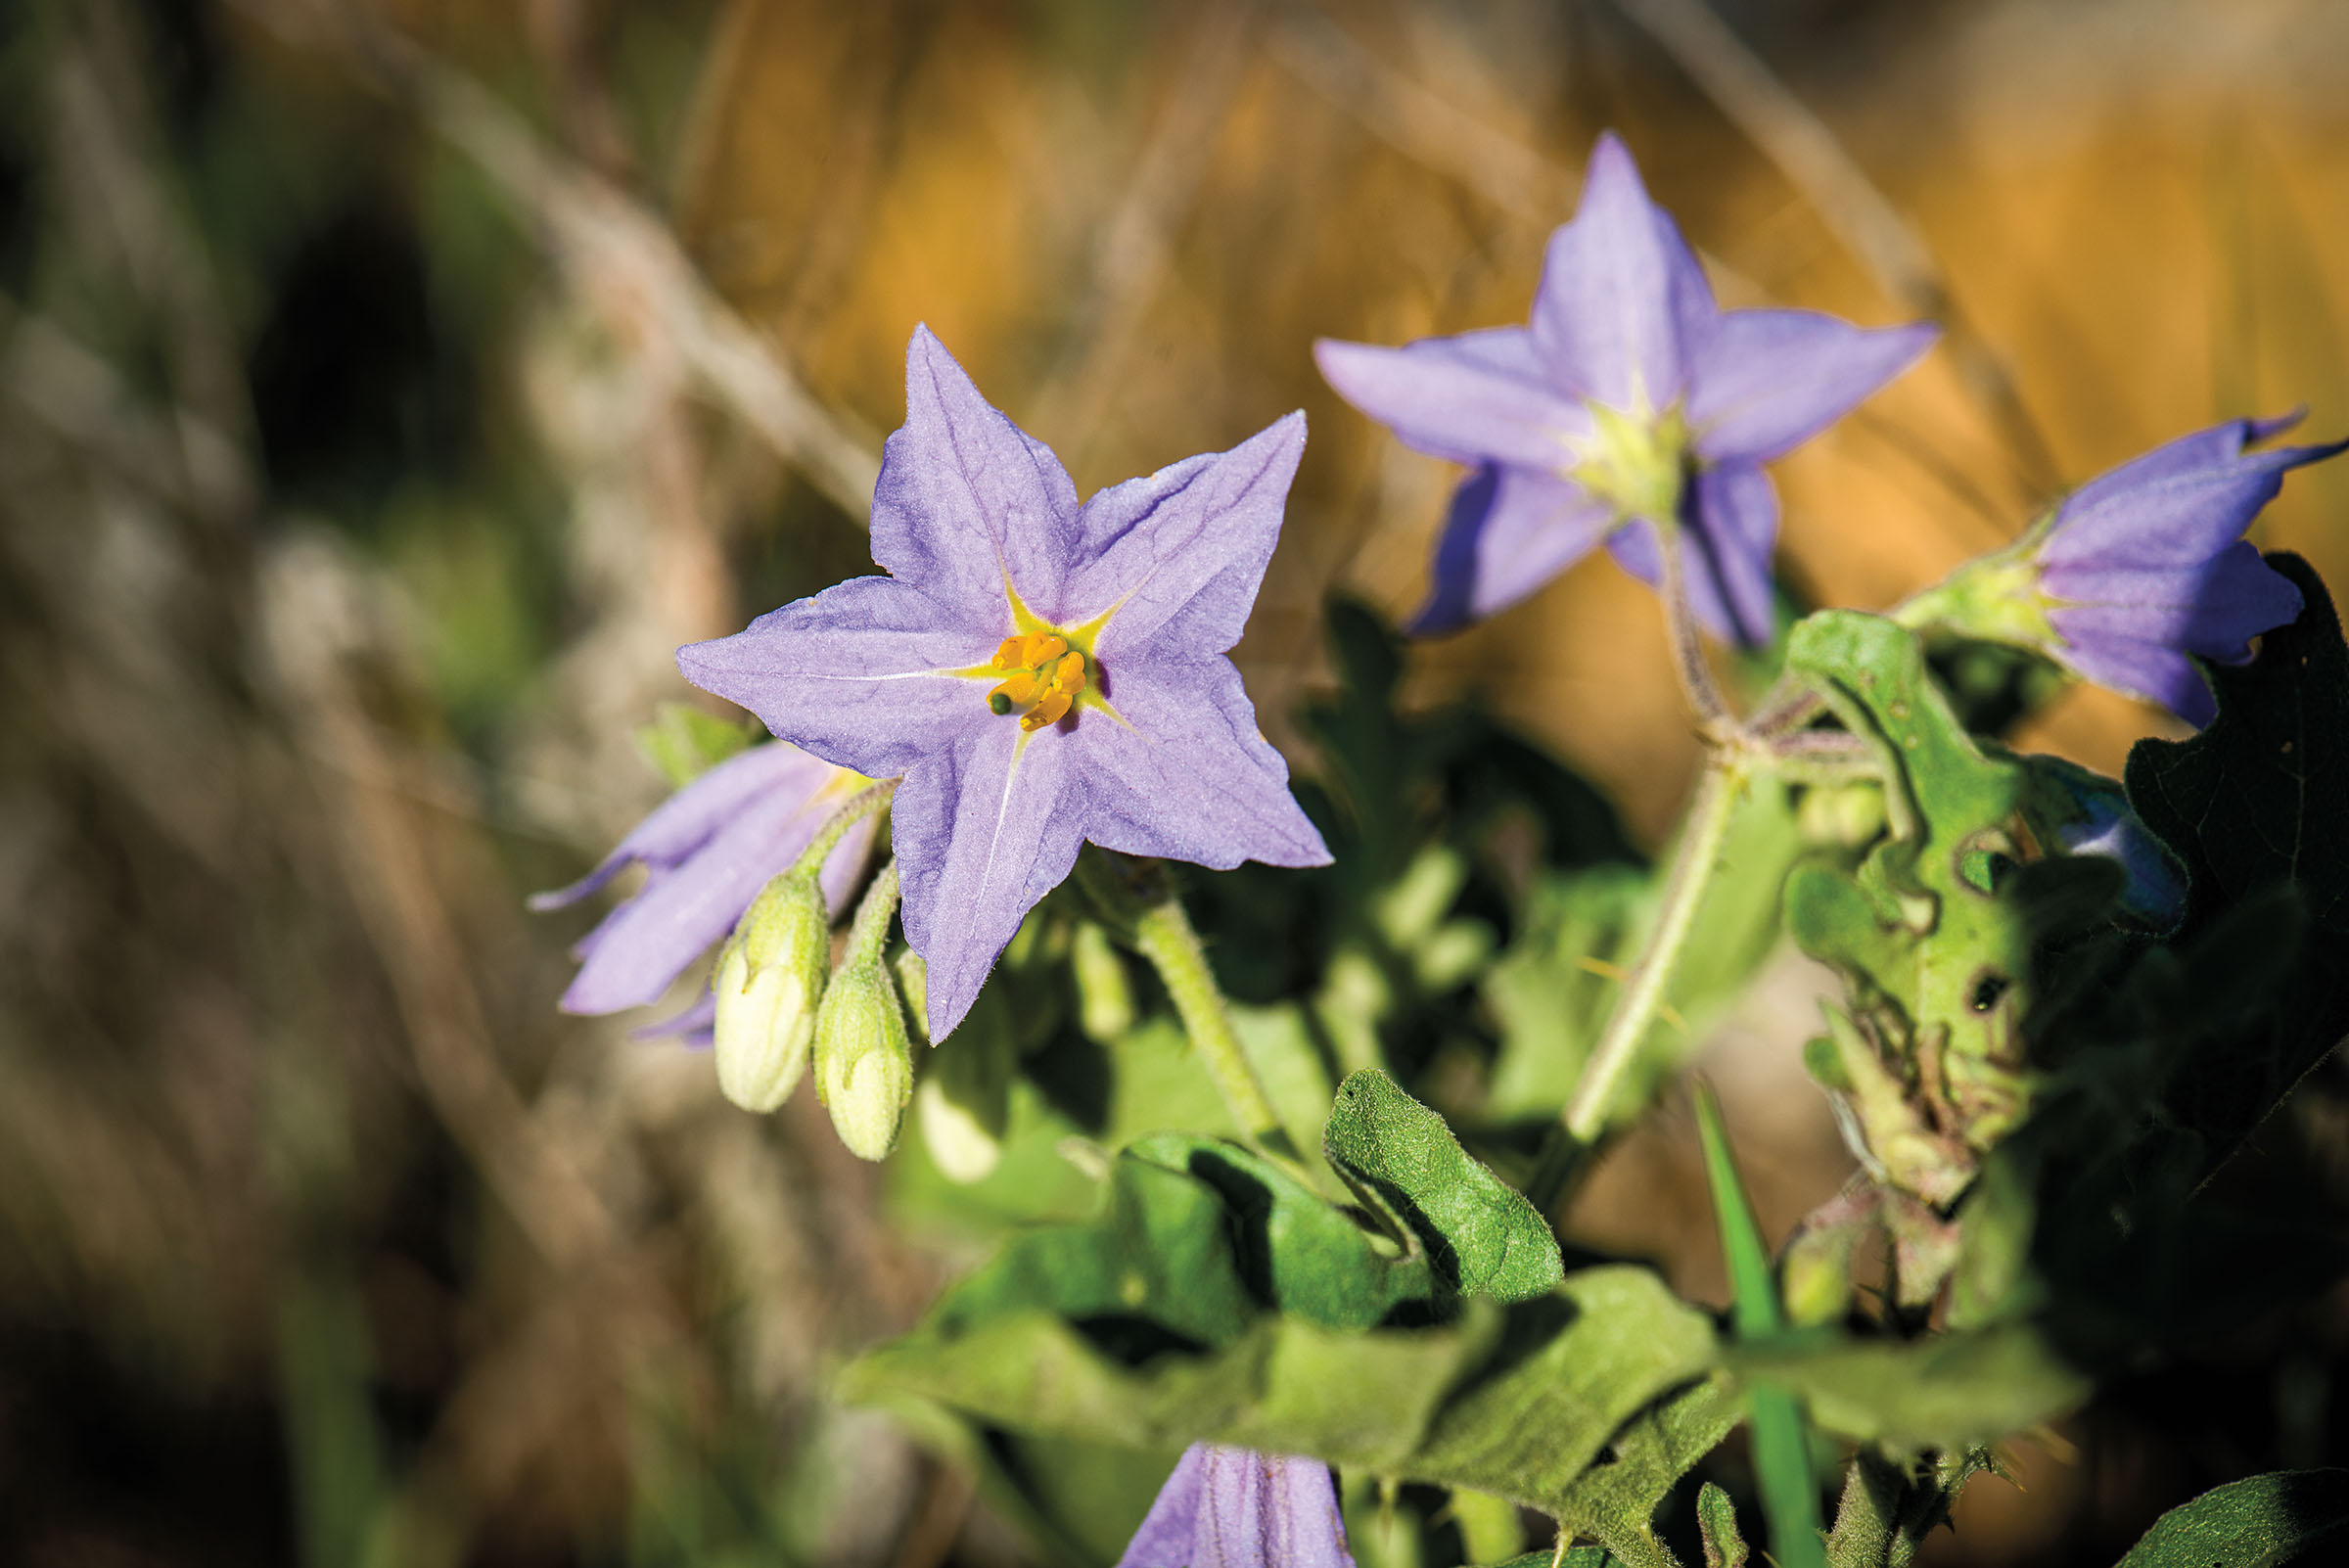 Purple, star-shaped flowers with green stems